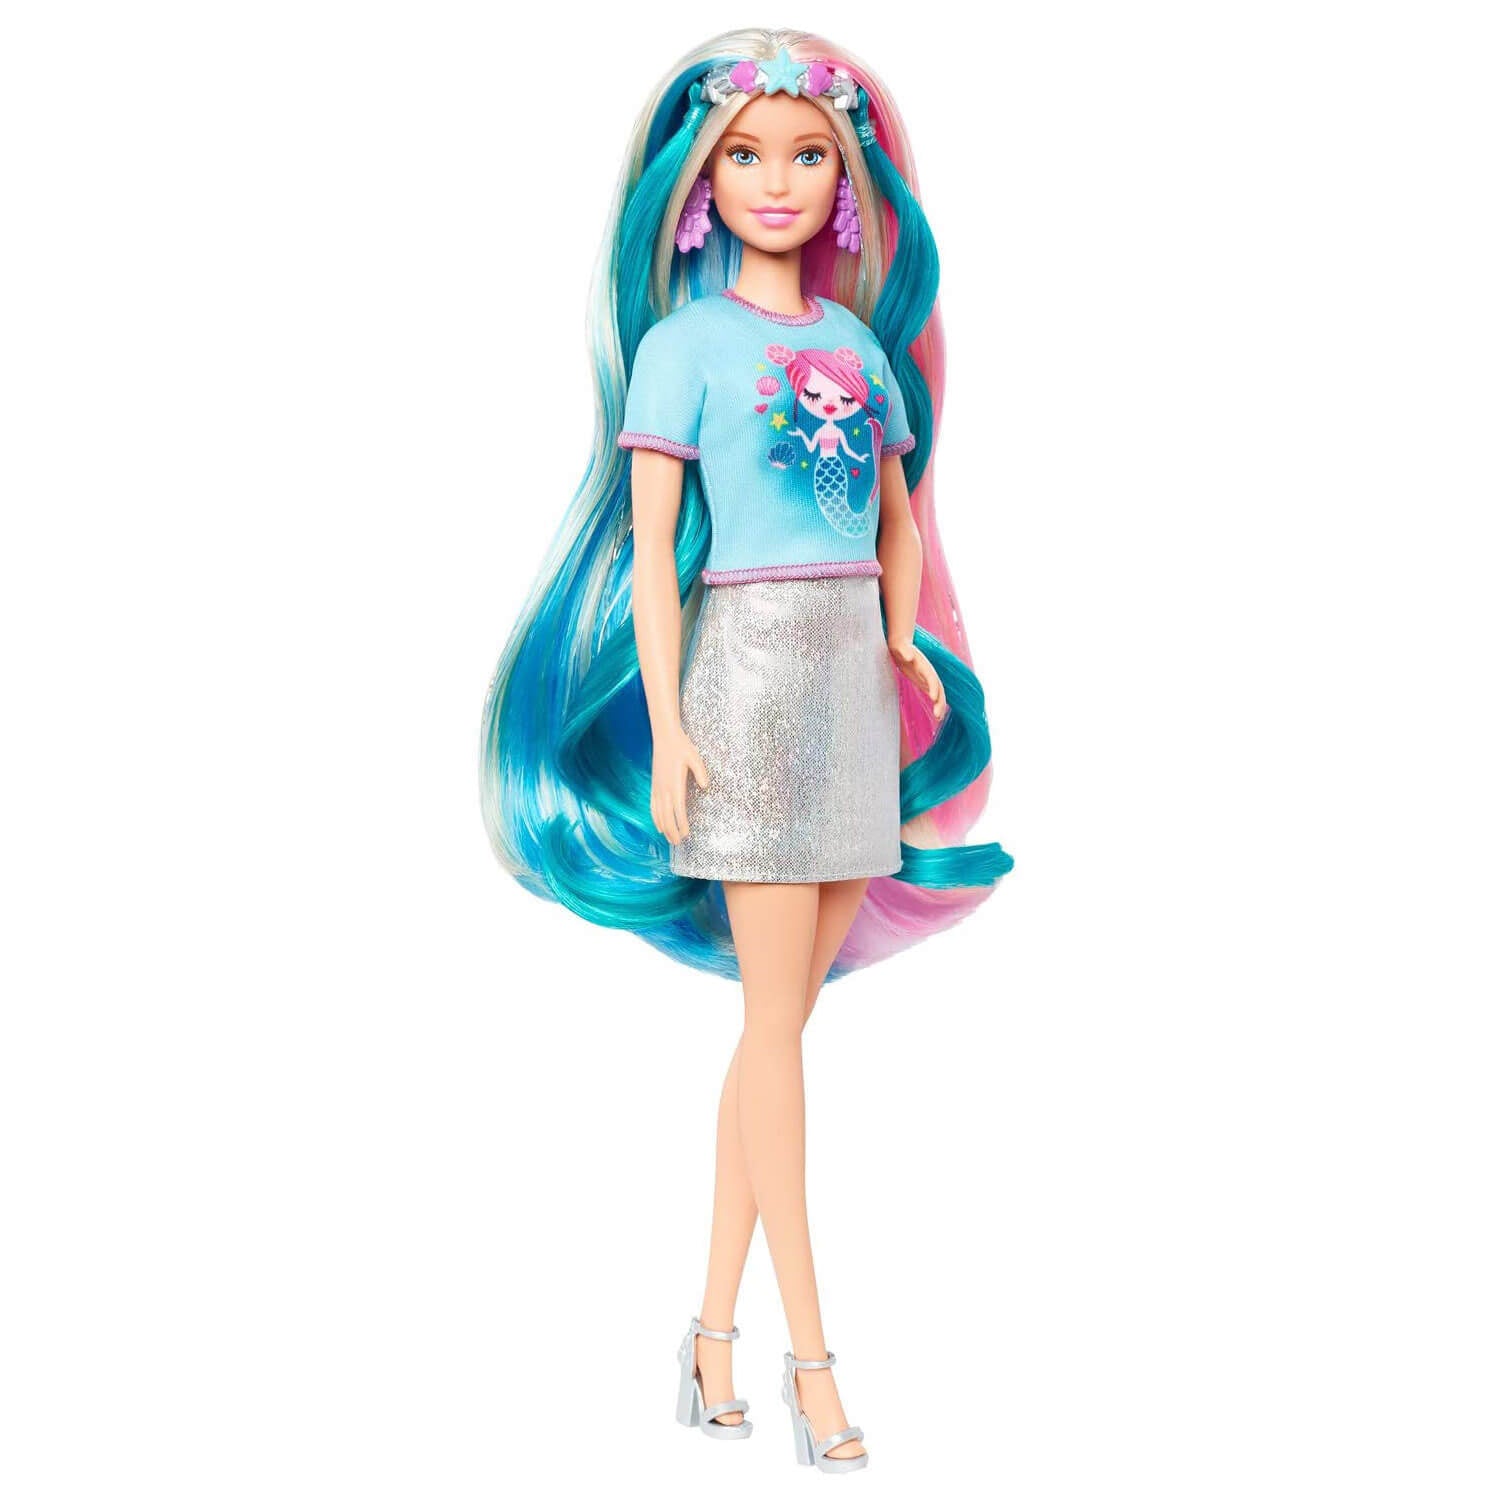 Barbie Fantasy Hair Doll with Accessories